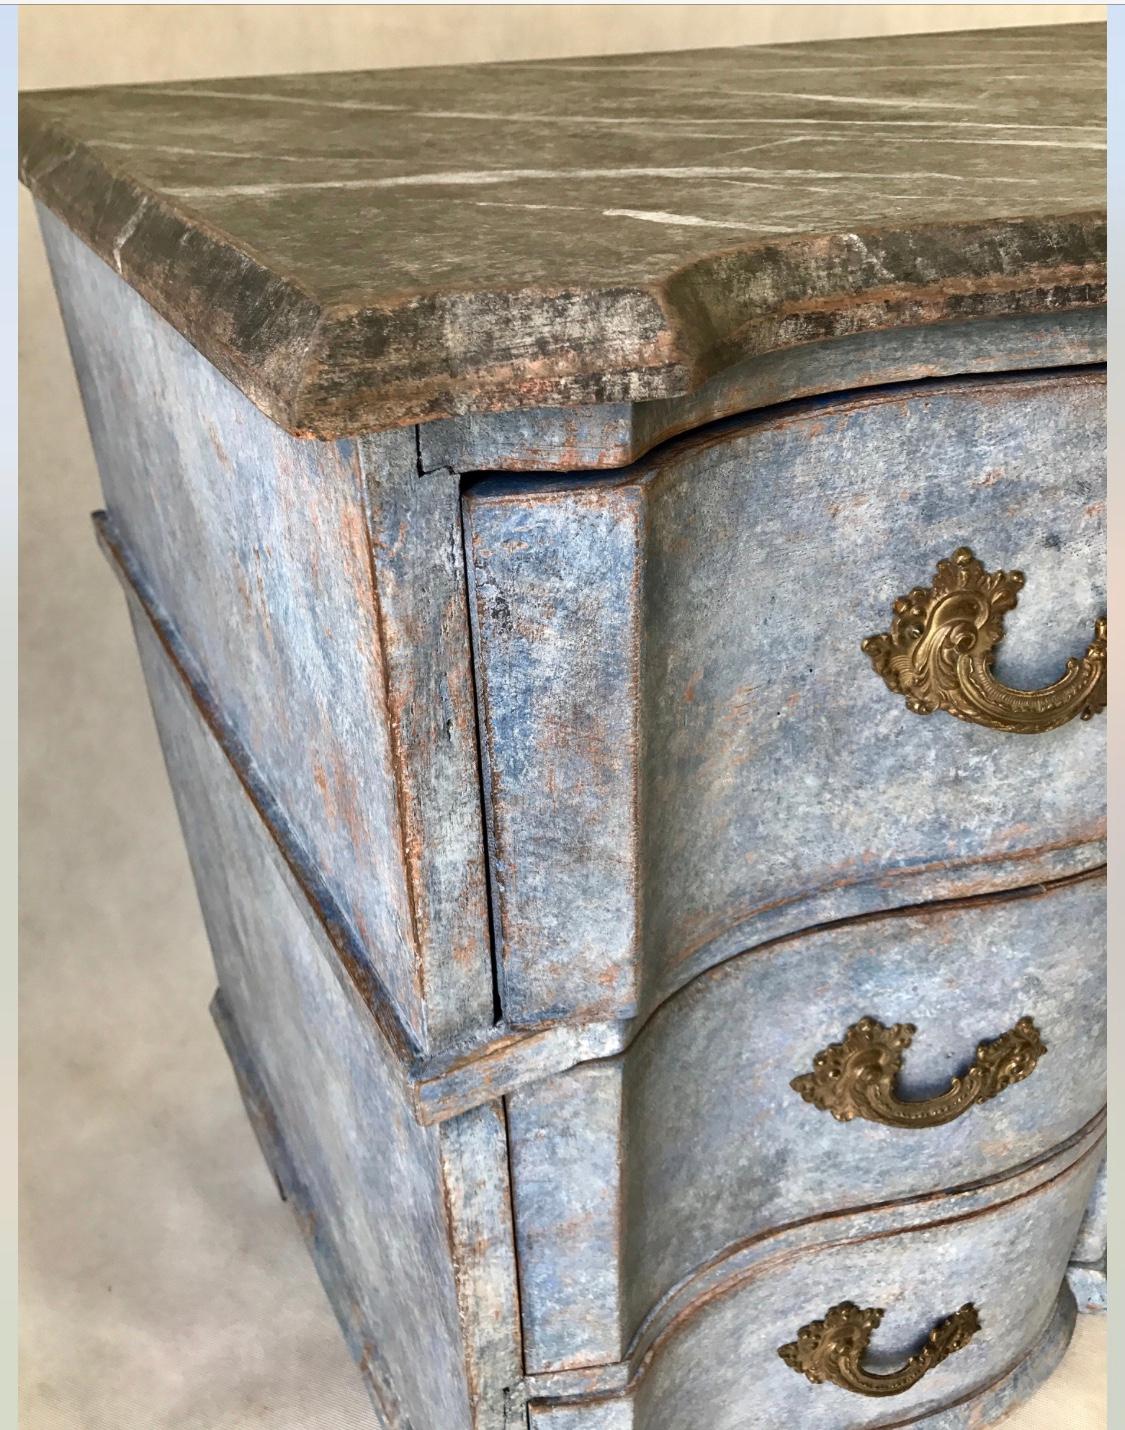 This three-drawer Swedish Baroque chest is a gorgeous saturated blue color with a black faux marble top in great condition, circa 1790-1800. The locks and hardware are original and drawers are generous. A stunning piece that would work in a variety